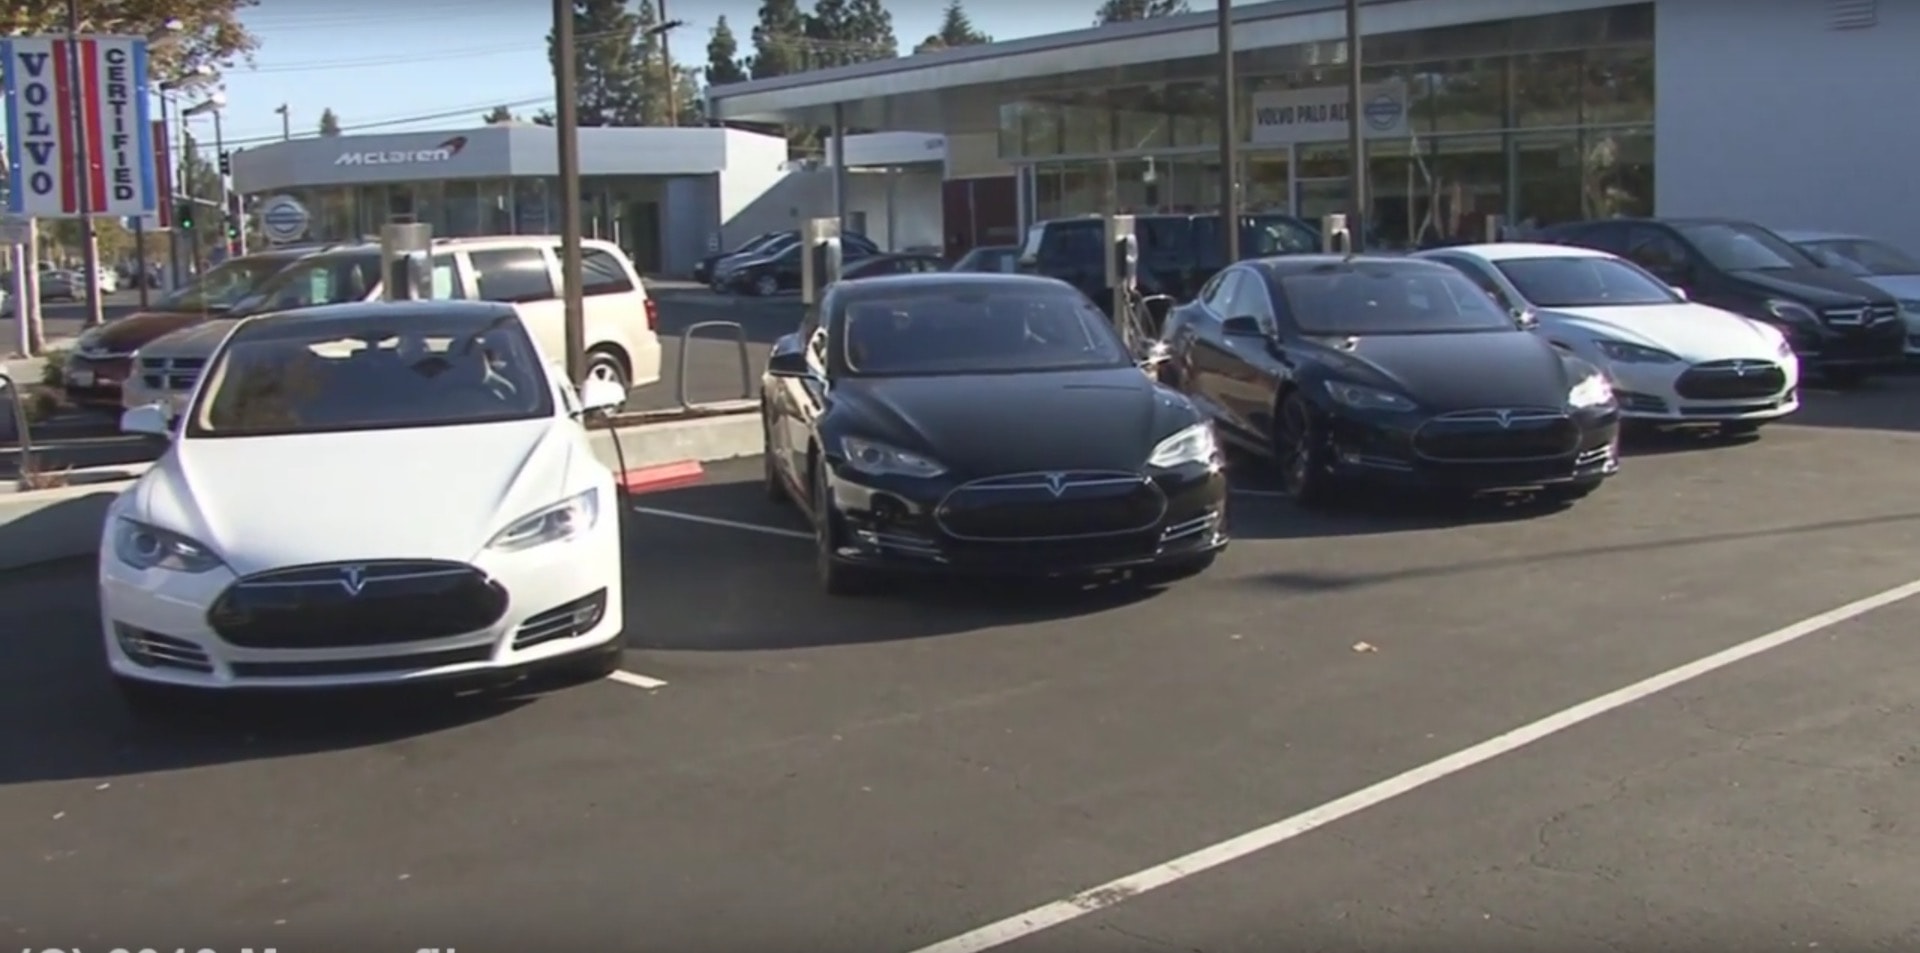 tesla-is-facing-first-world-problems-it-ran-out-of-parking-spaces-for-its-employees-103343_1.jpg